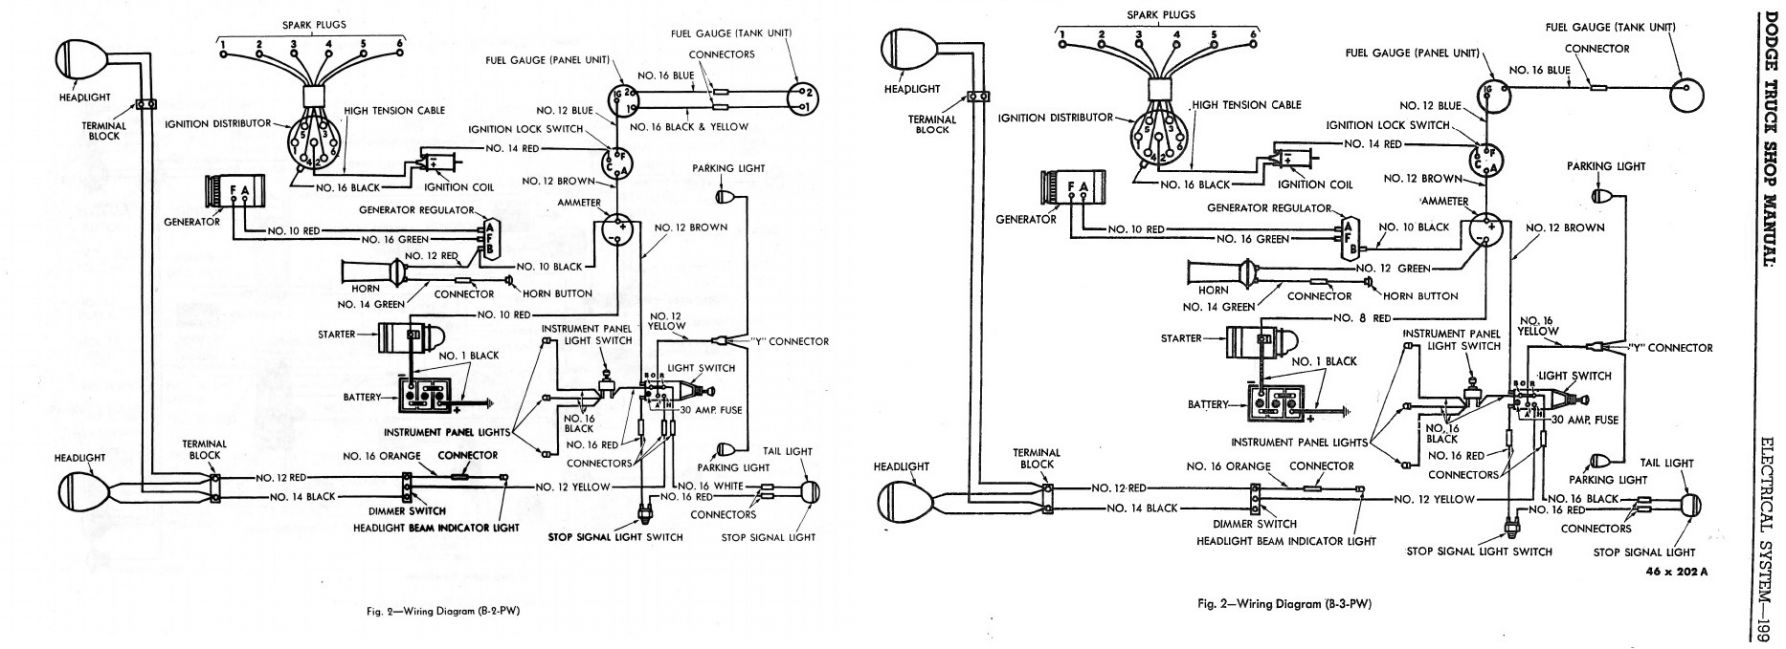 Wiring Diagrams - B2-PW B3-PW Side by Side Wire Diagram - T137 Photo Gallery  Dodge B2 Wiring Diagram    T137 Dodge Power Wagons